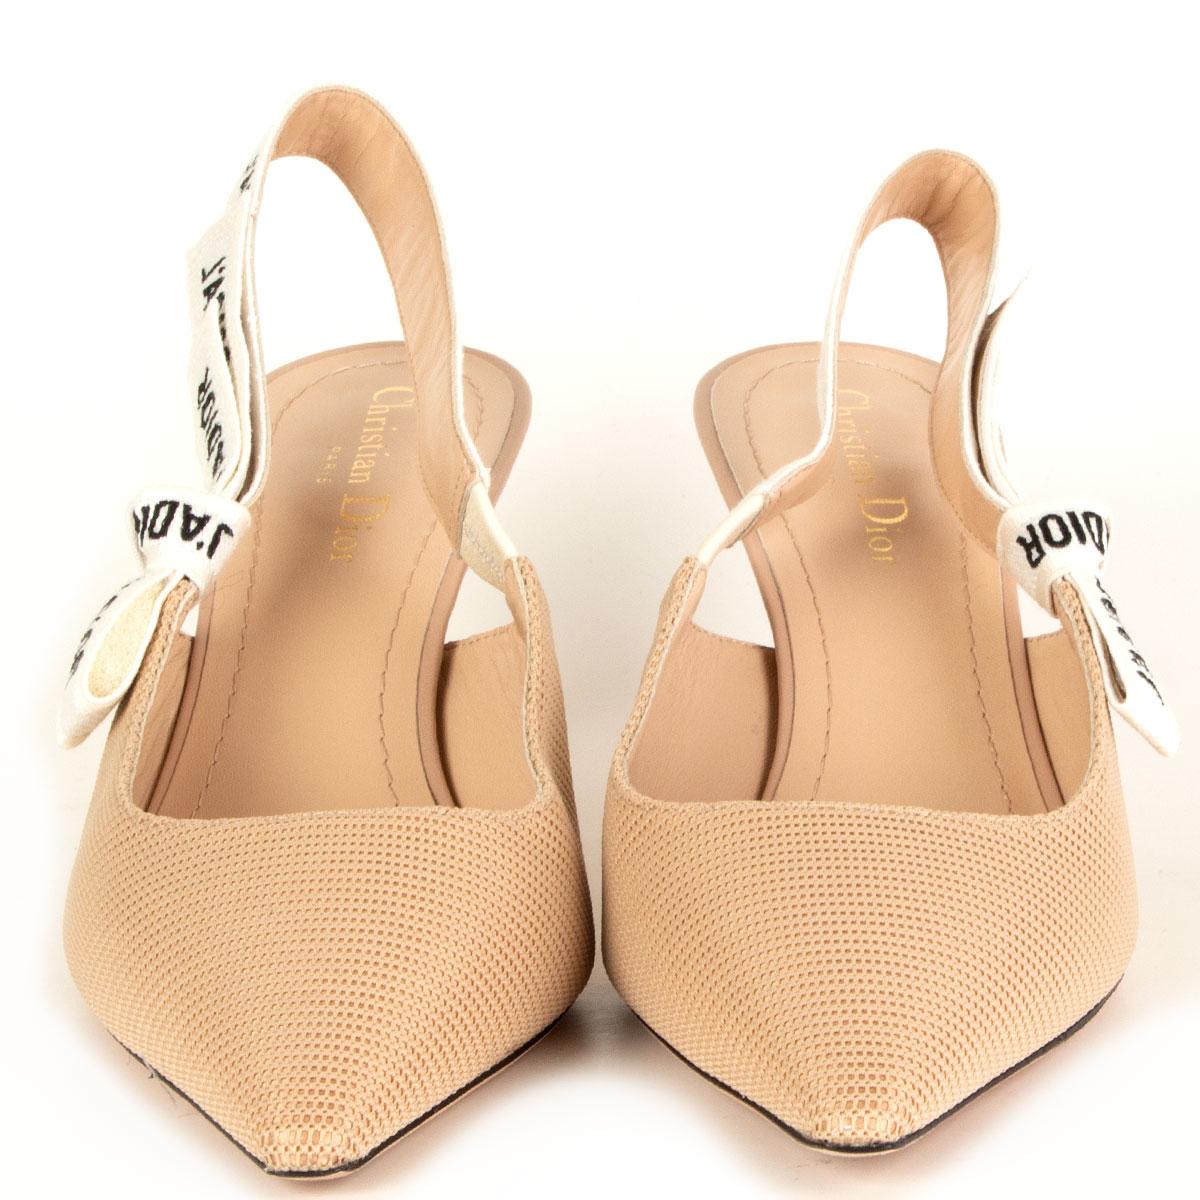 100% authentic Christian Dior J'Adior slingback pumps in nude technical fabric featuring J'ADIOR' two-tone embroidered cotton ribbon embellished with a flat bow. Lined in nude lambskin. Have been worn and are in virtually new condition. Come with